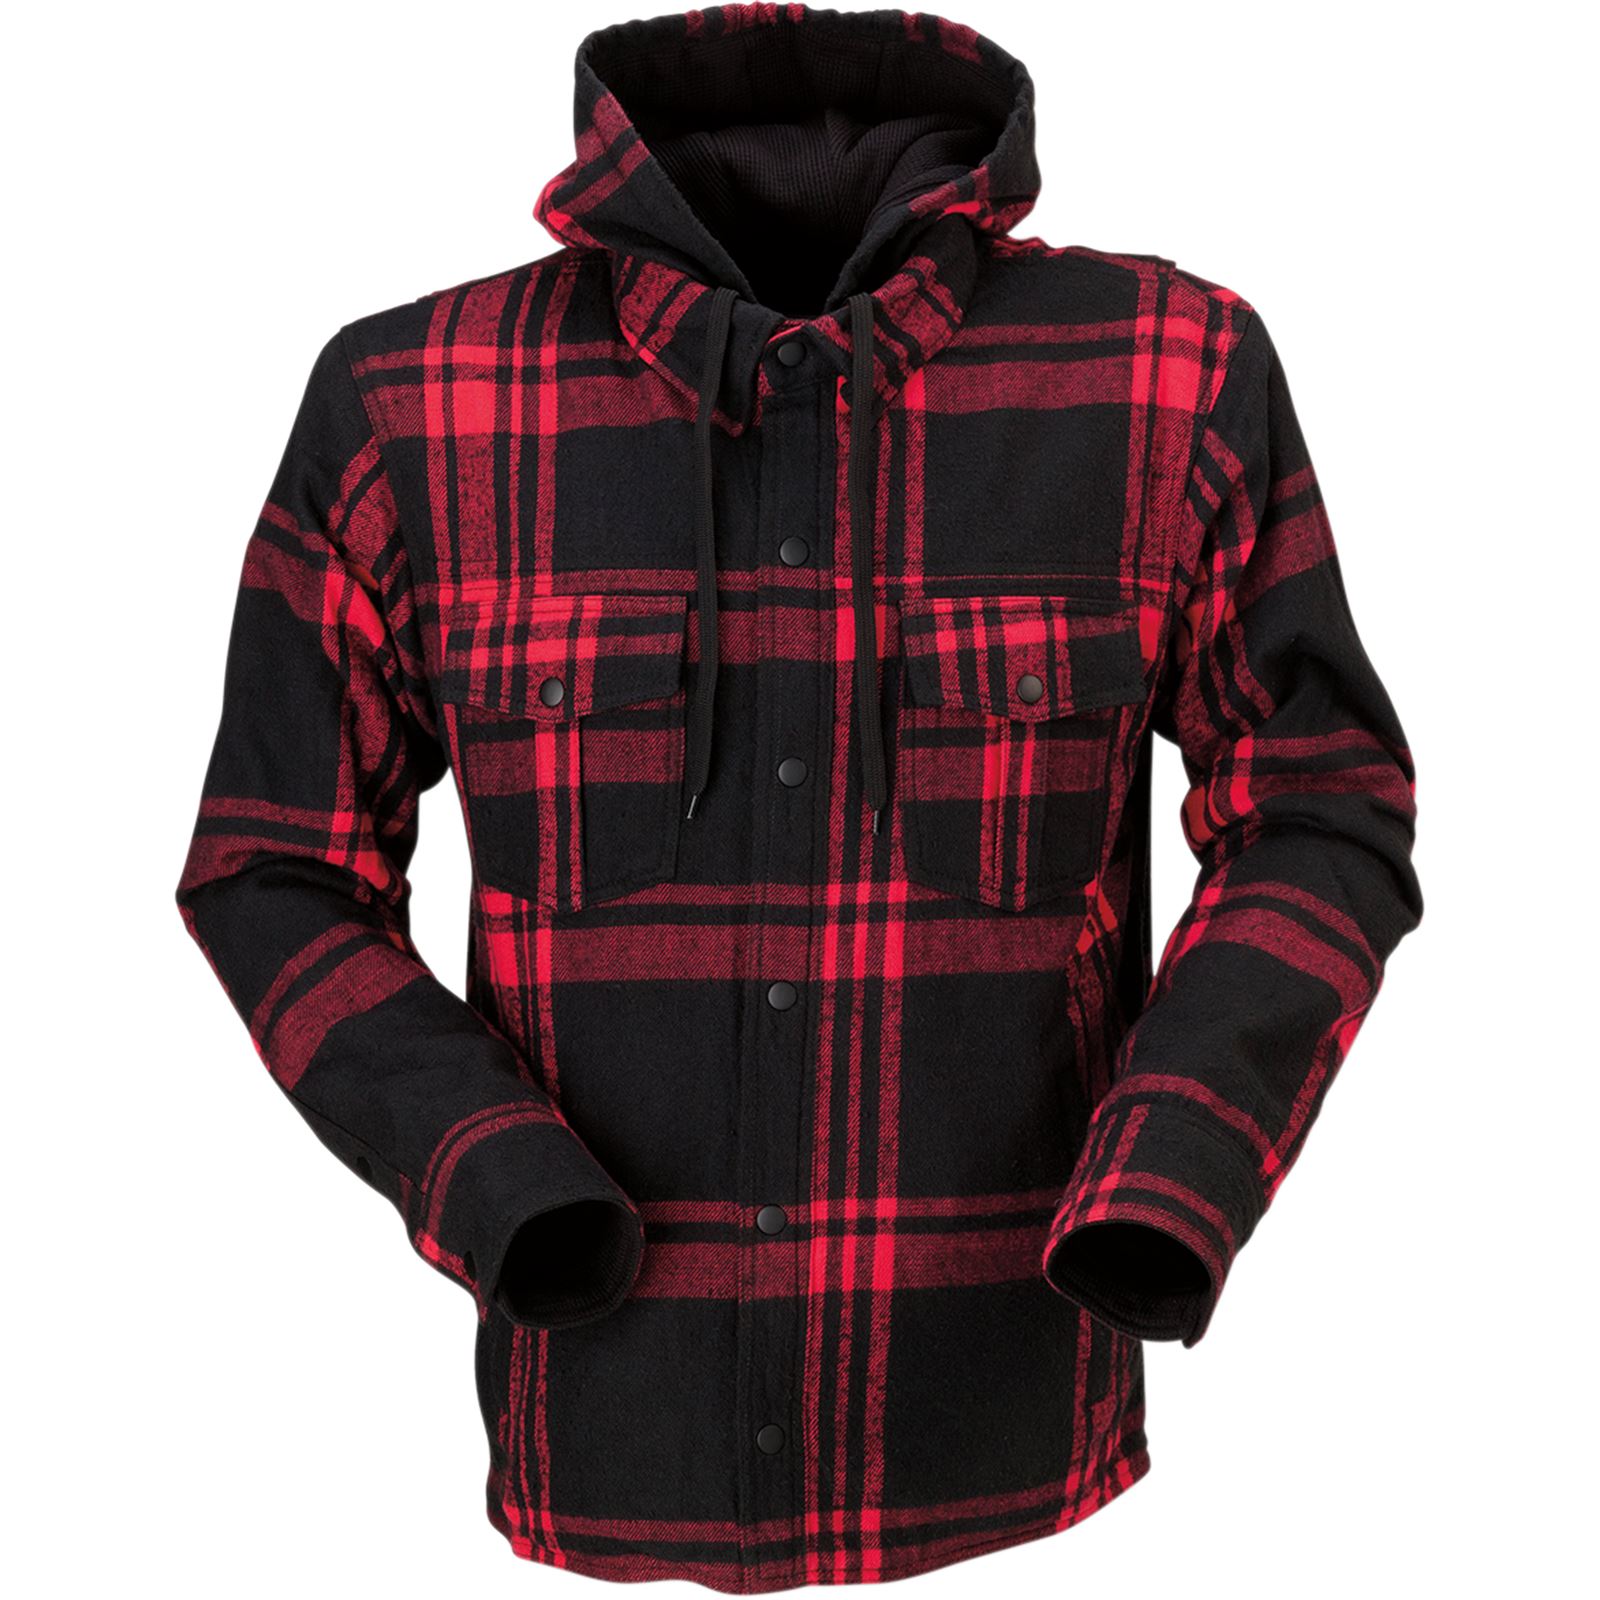 Z1R Timber Flannel Shirt - Red/Black - XL